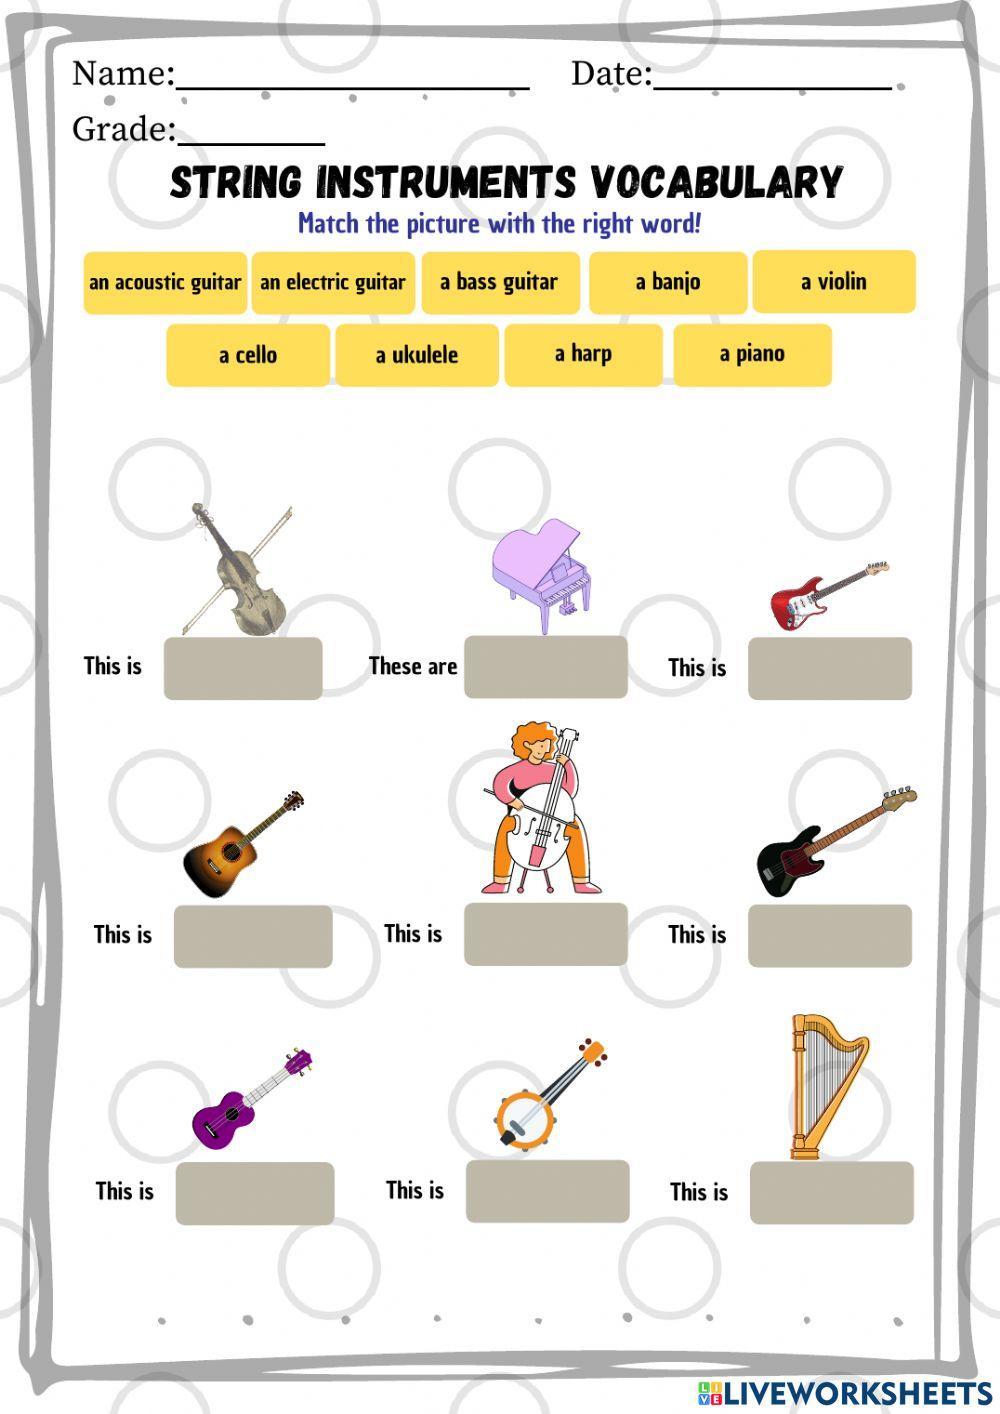 (Cycle 2 Session 9 Annex 2) String Instruments vocabulary